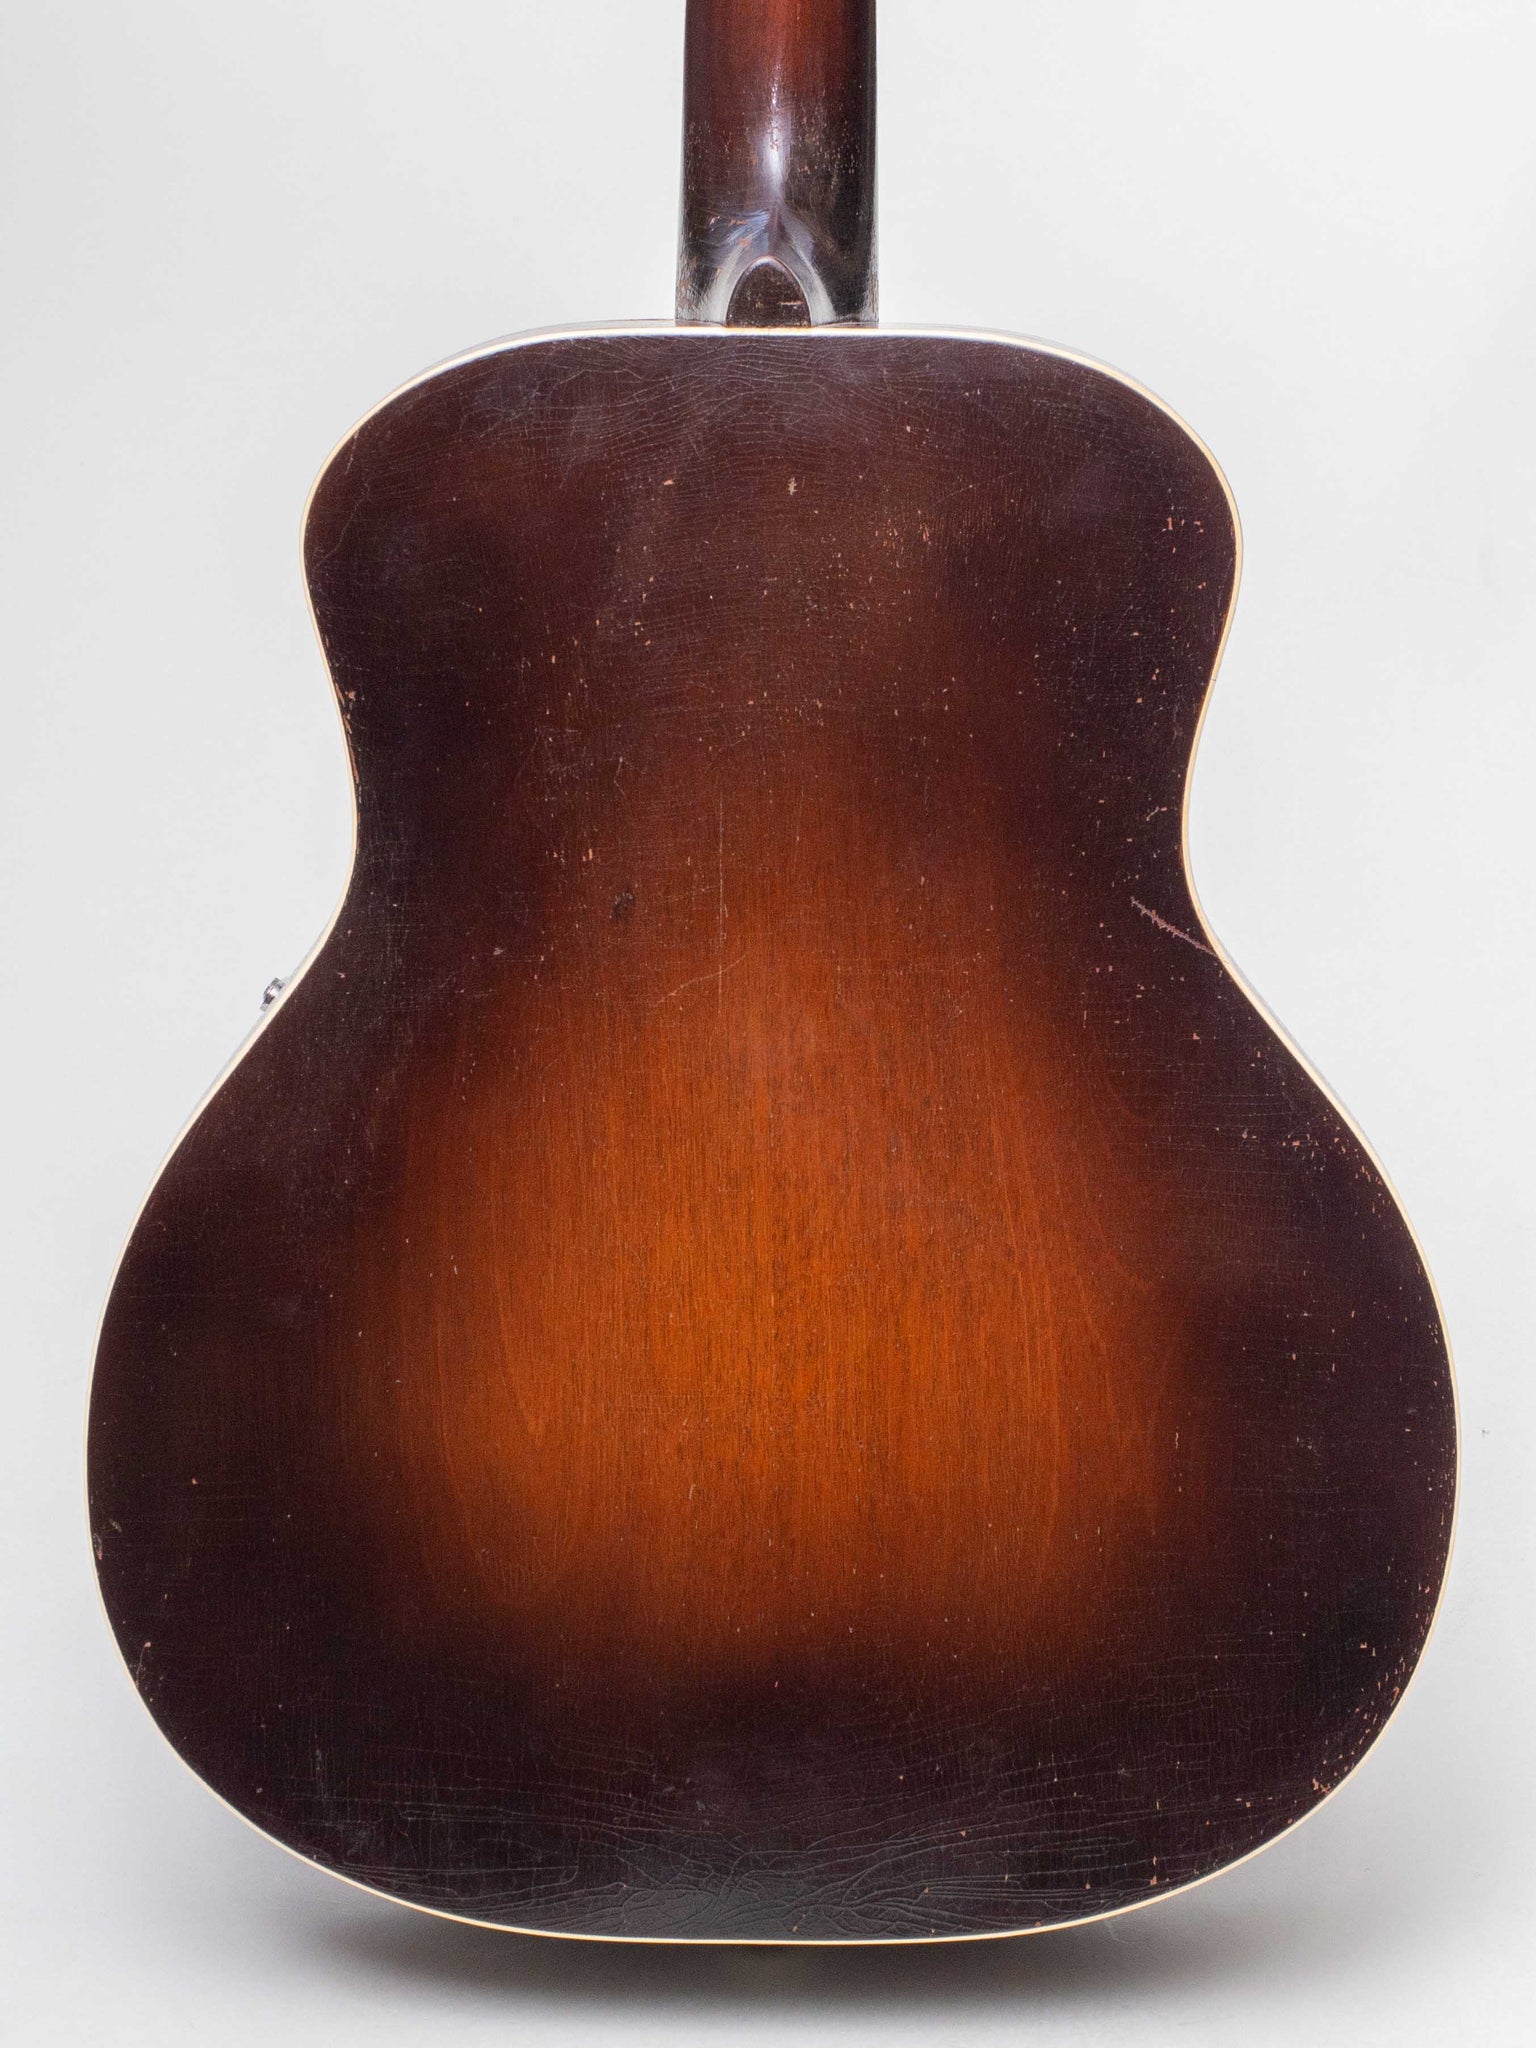 1933 Gibson L-75